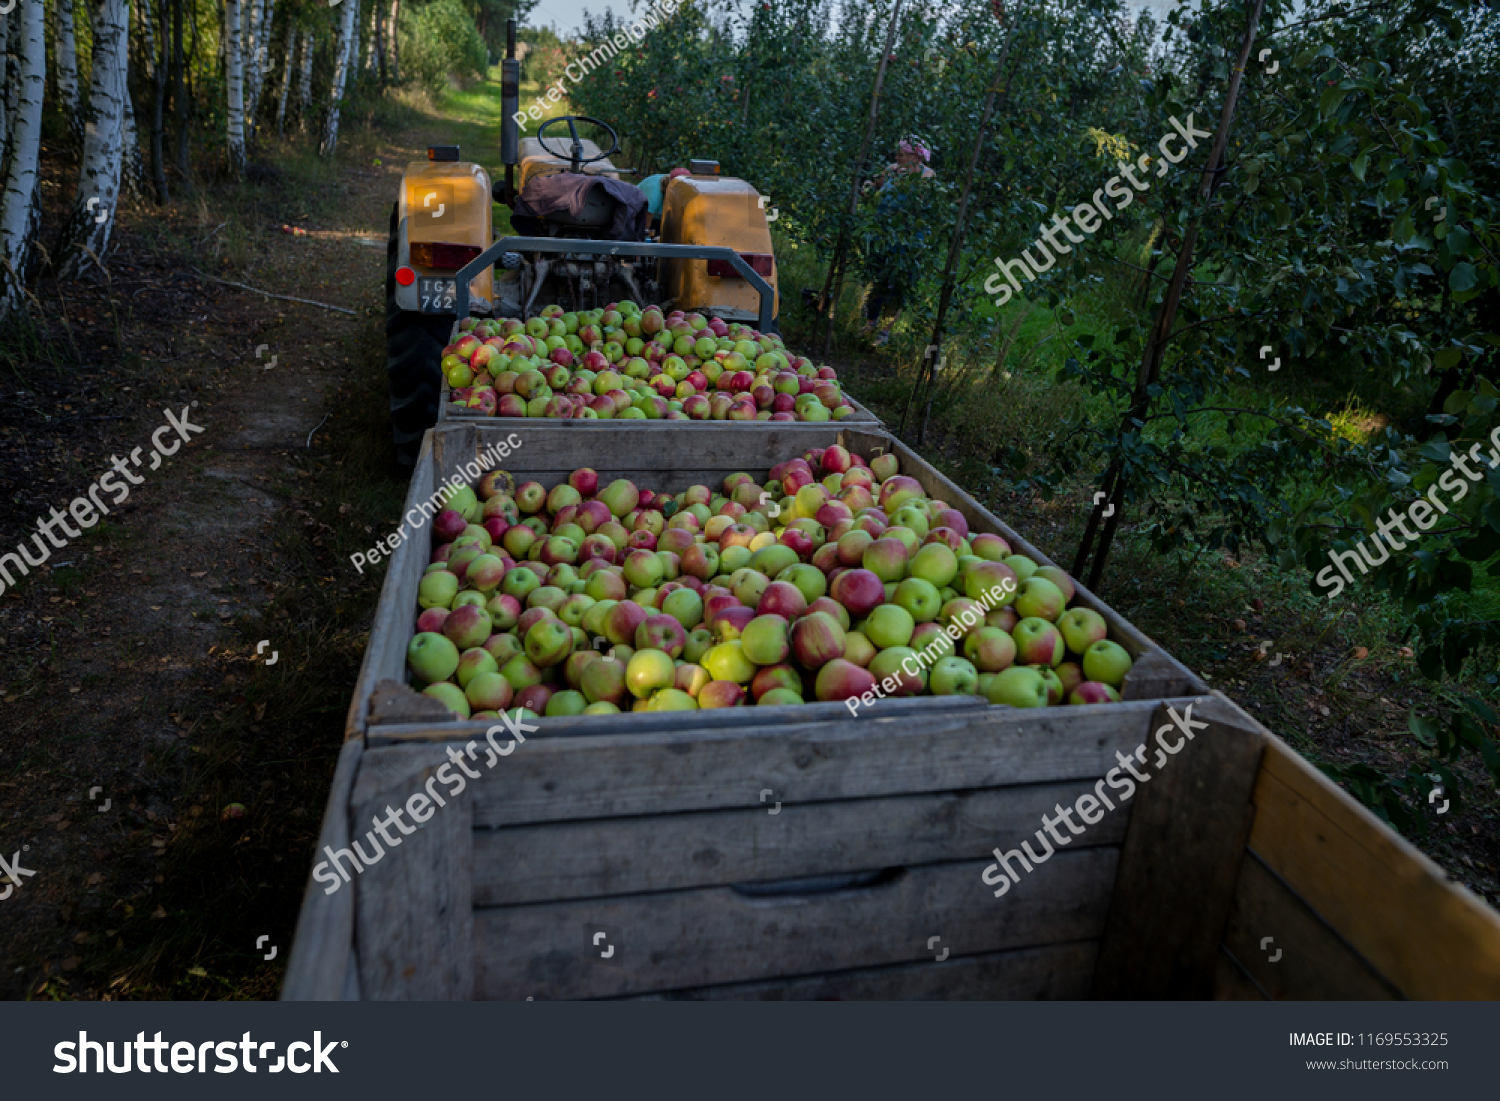 Wooden crates full of apples #1169553325